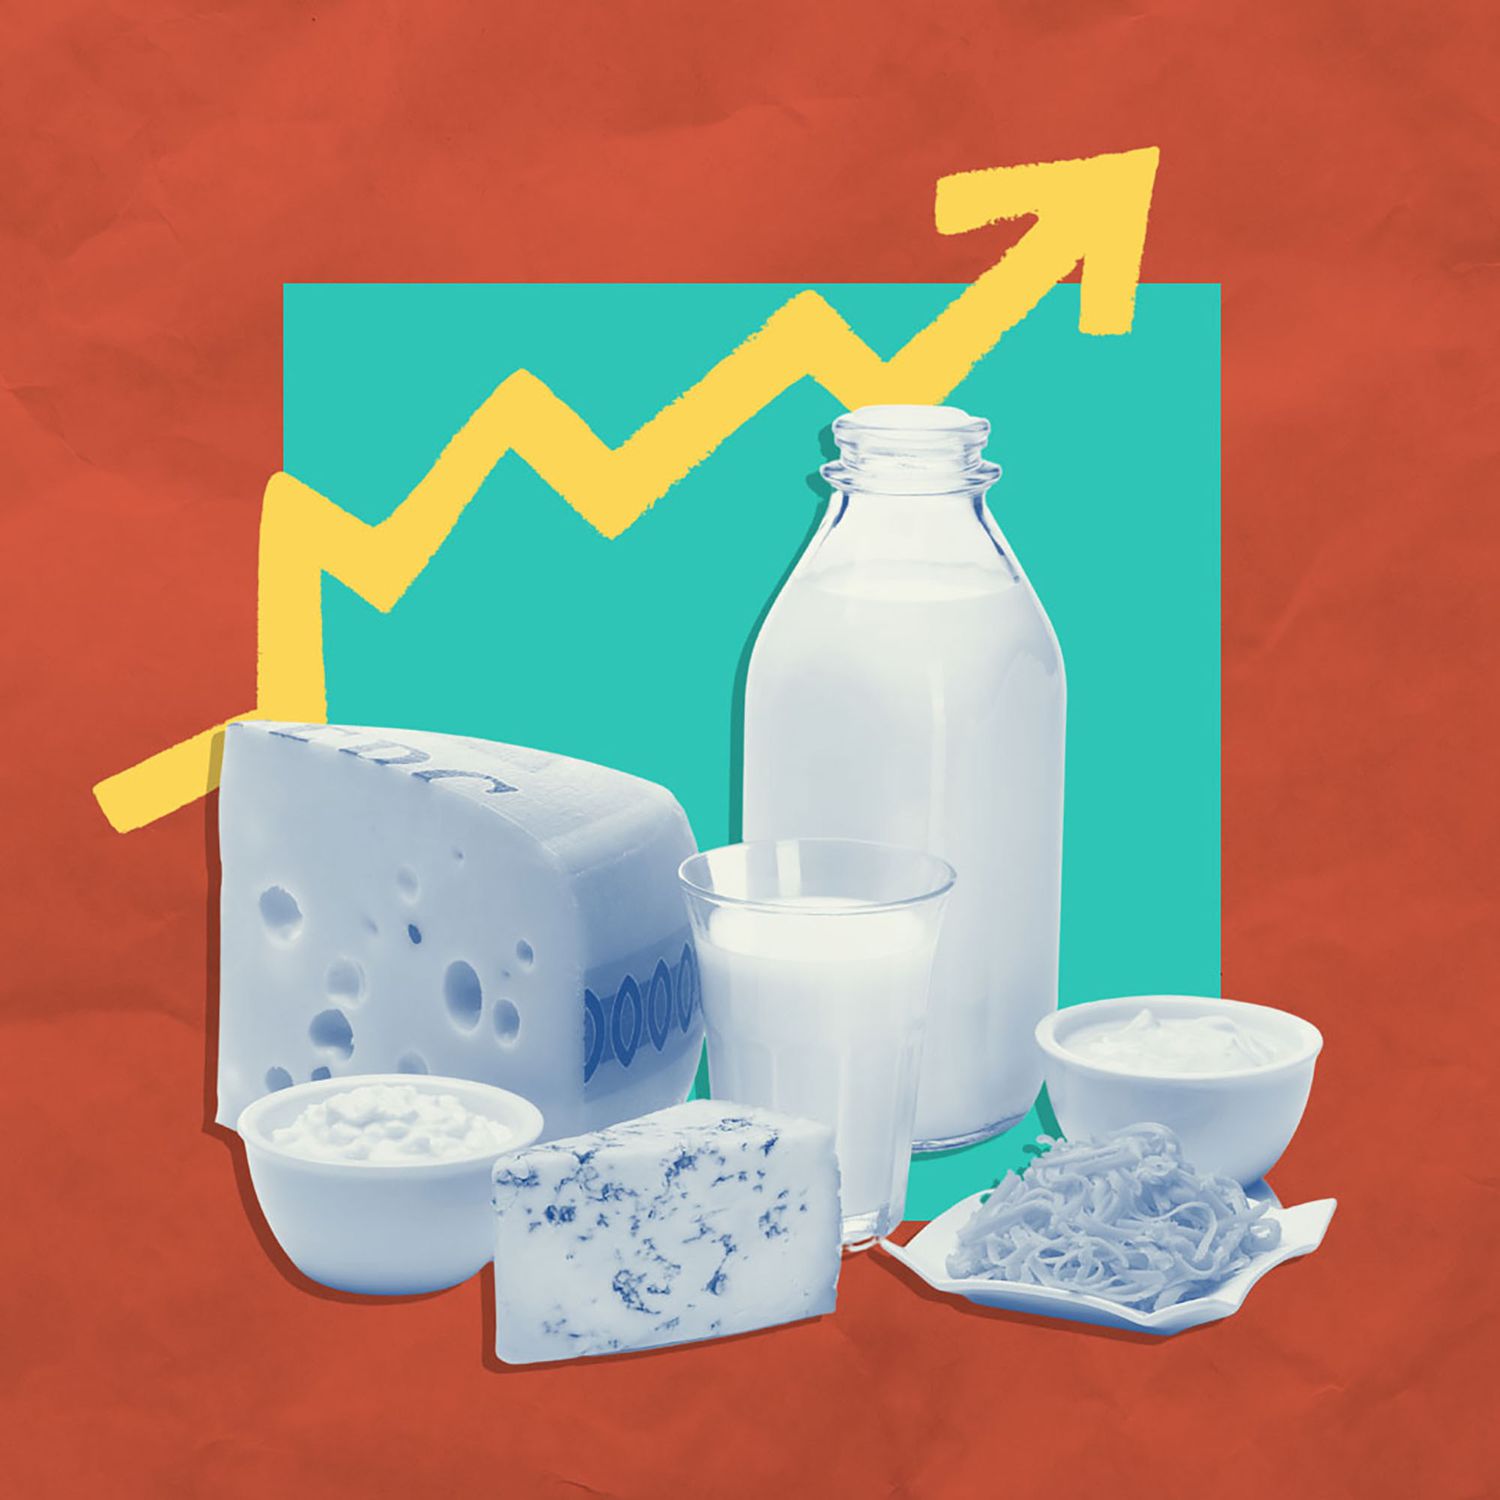 Milk, cheese and other dairy products sit in front of an upward arrow indicating the rising prices of dairy.